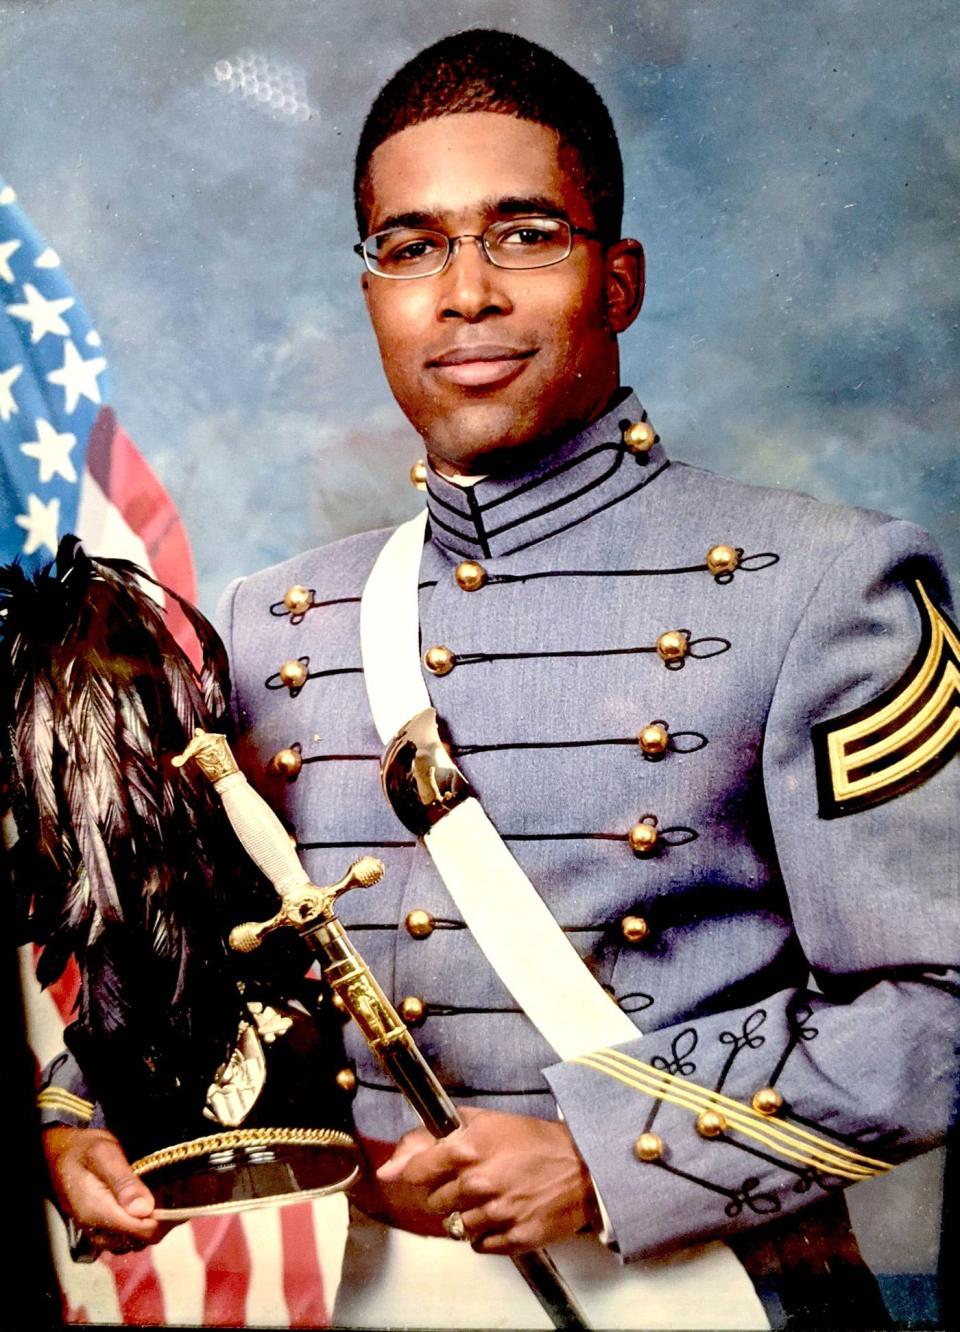 Cadet Kevin Lowther, West Point Class of 2004.